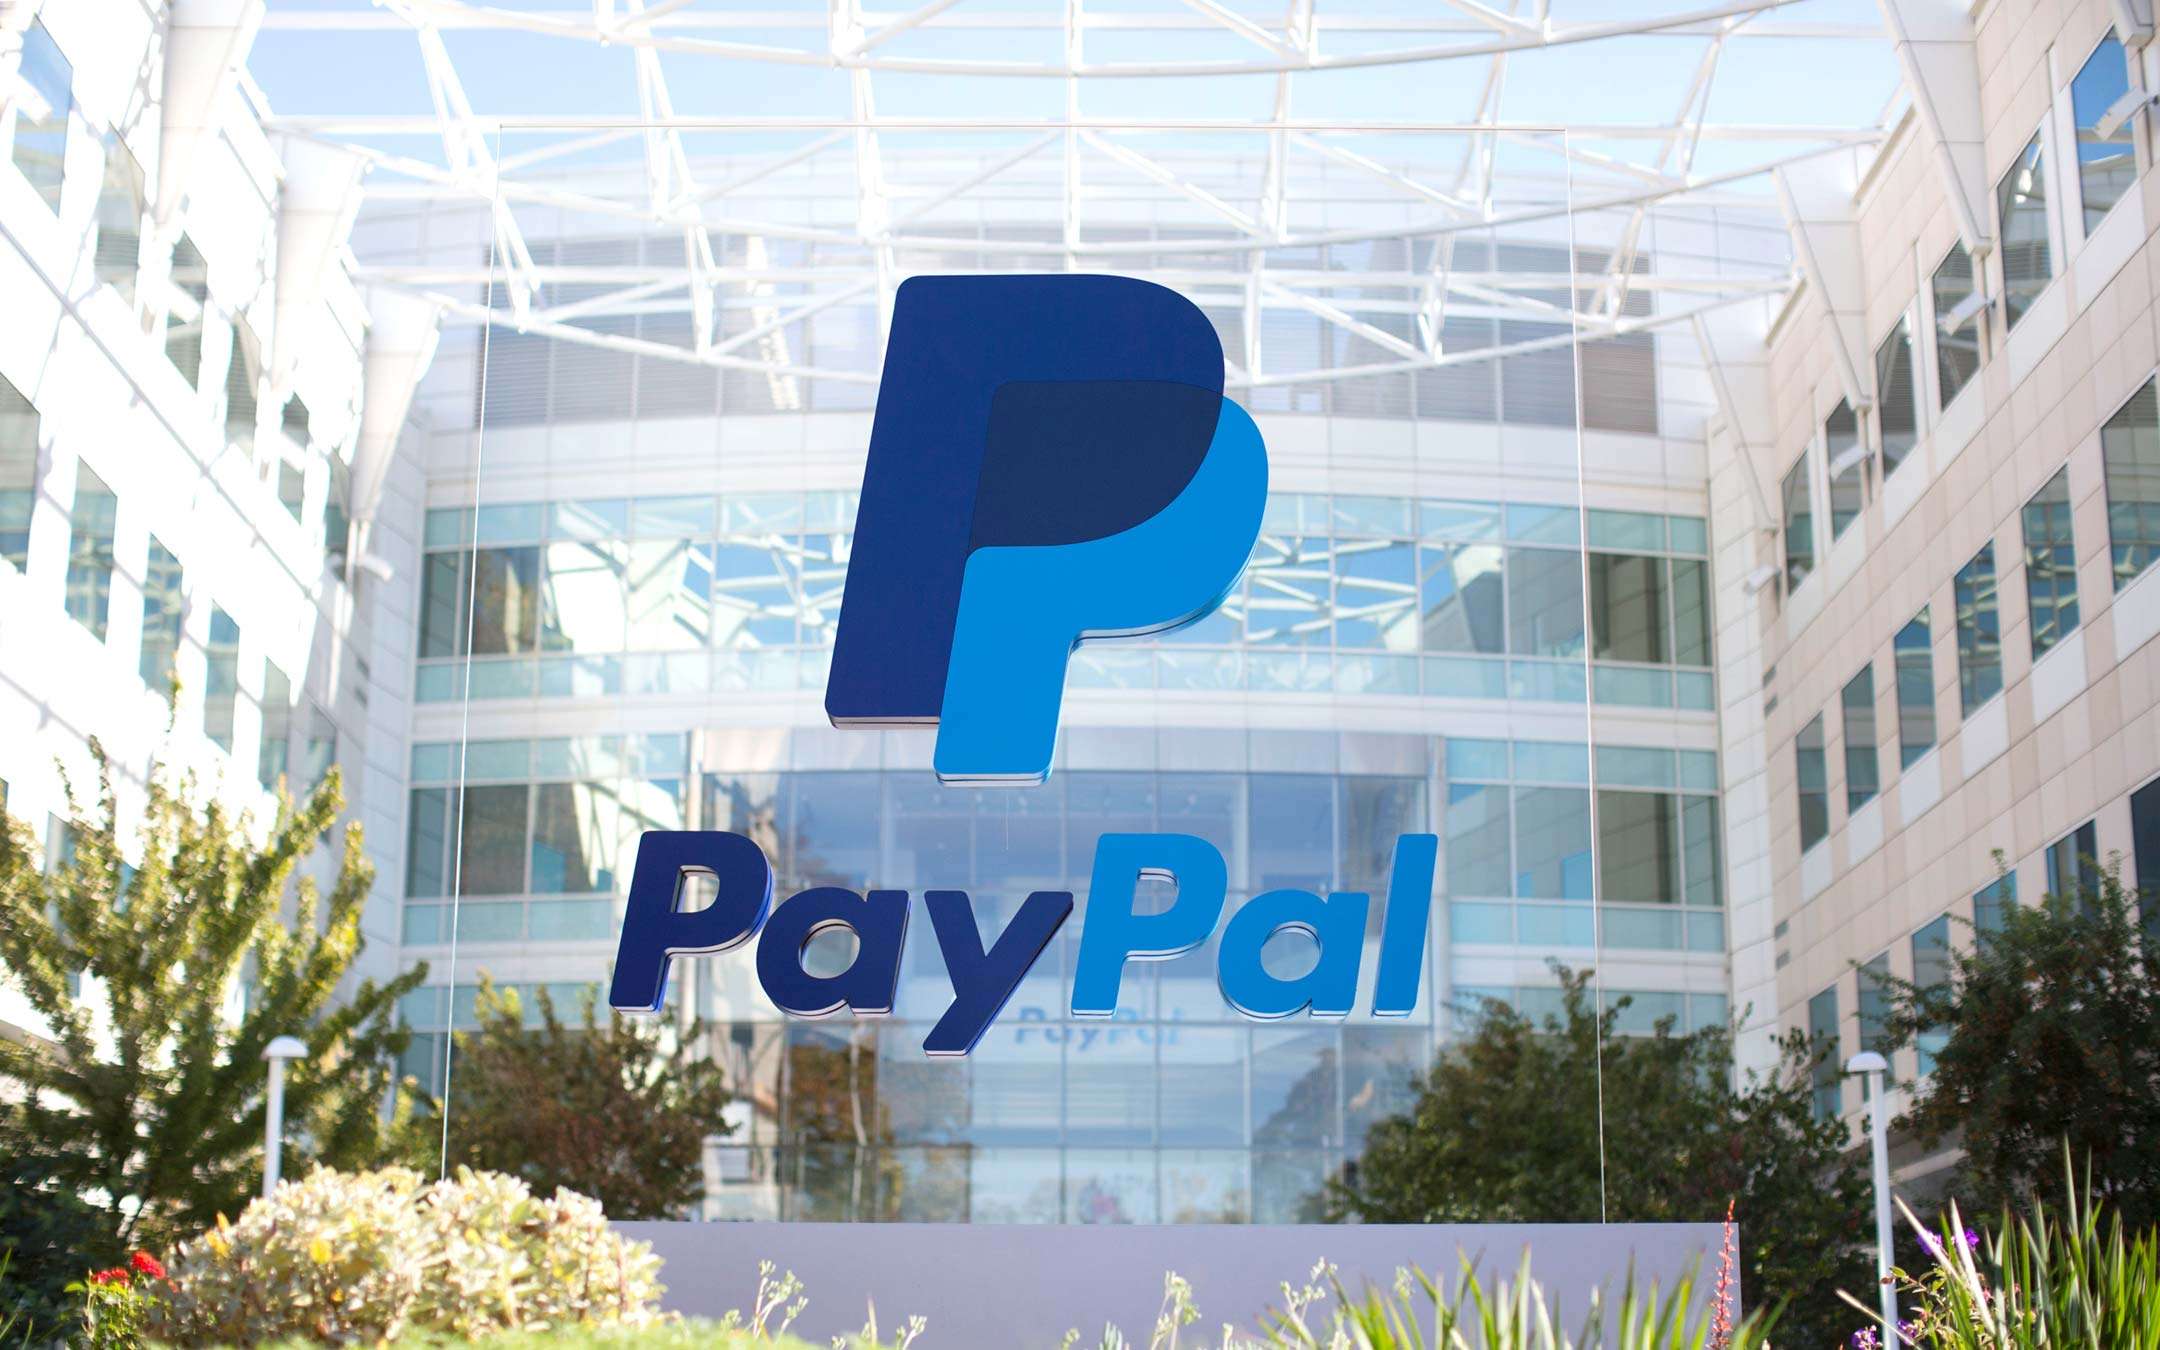 PayPal will not invest in Bitcoin, according to CFO